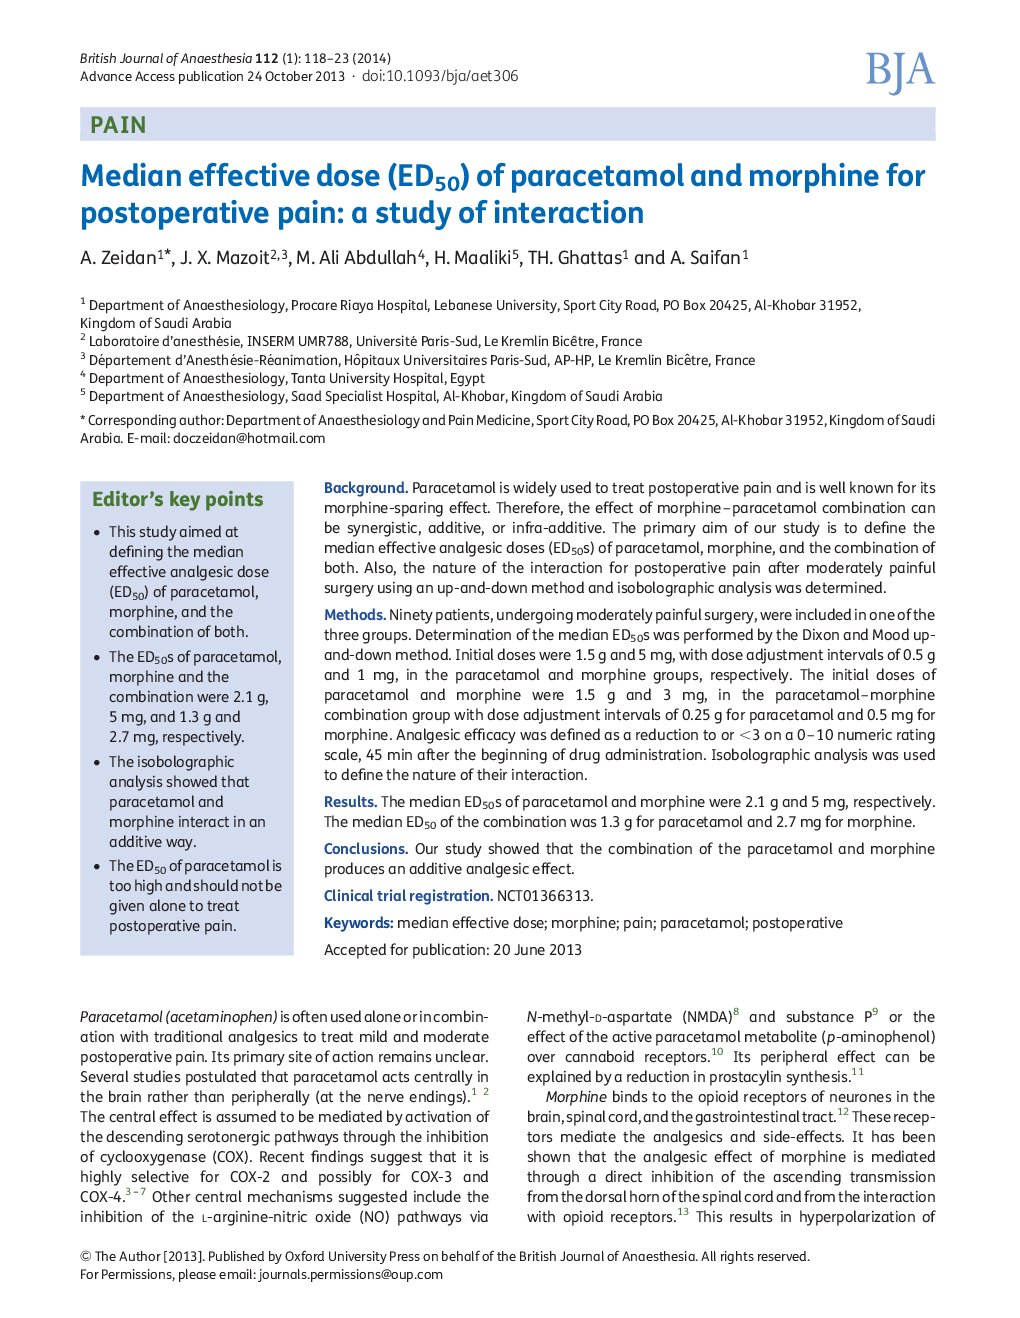 Median effective dose (ED50) of paracetamol and morphine for postoperative pain: a study of interaction